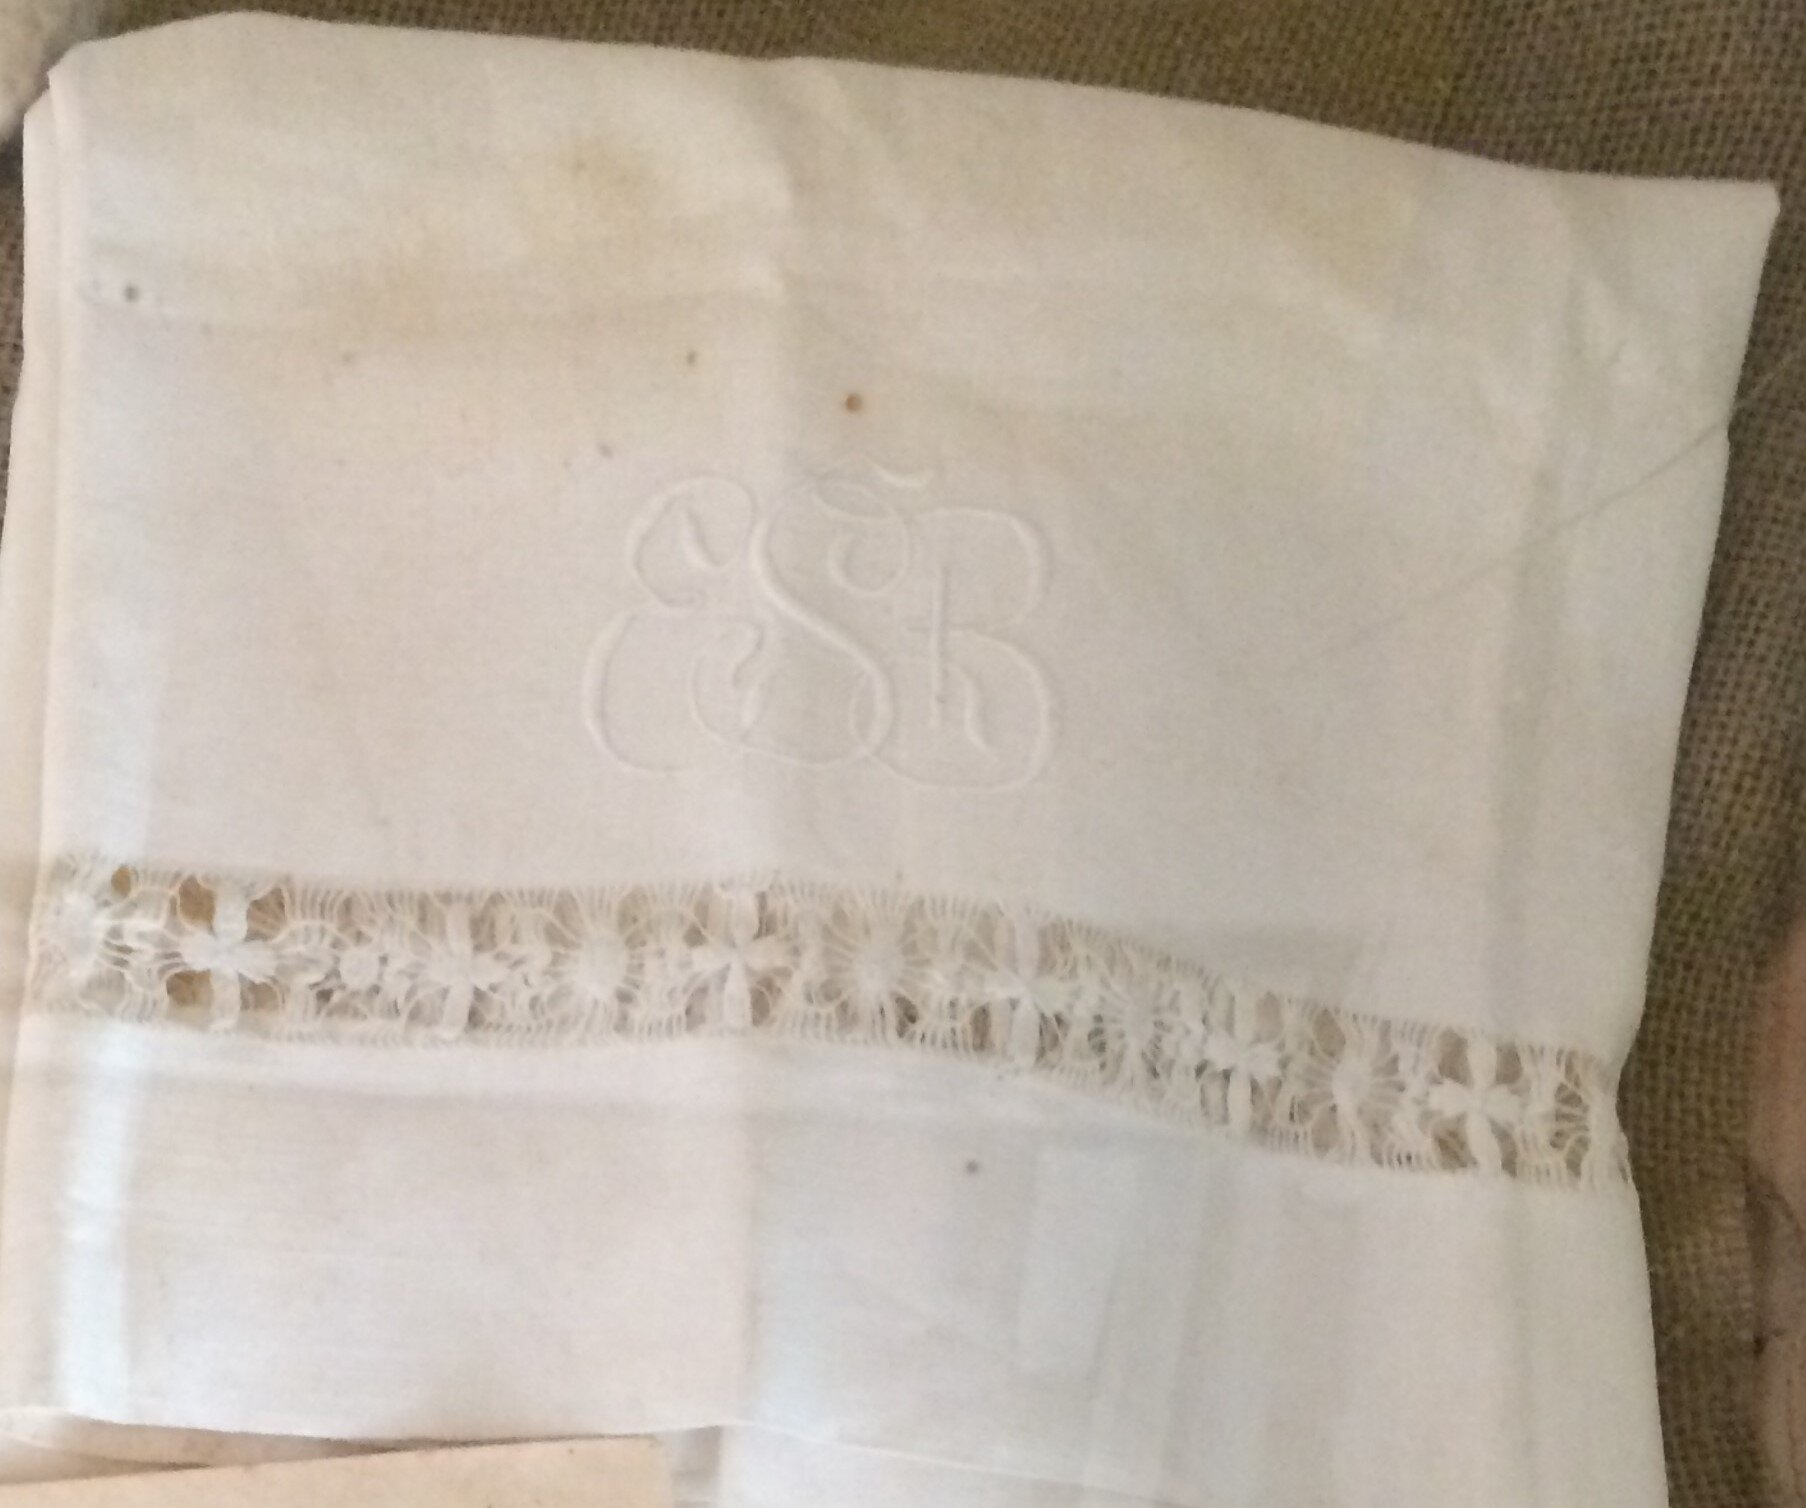  A napkin she edged and embroidered with initials ESB 